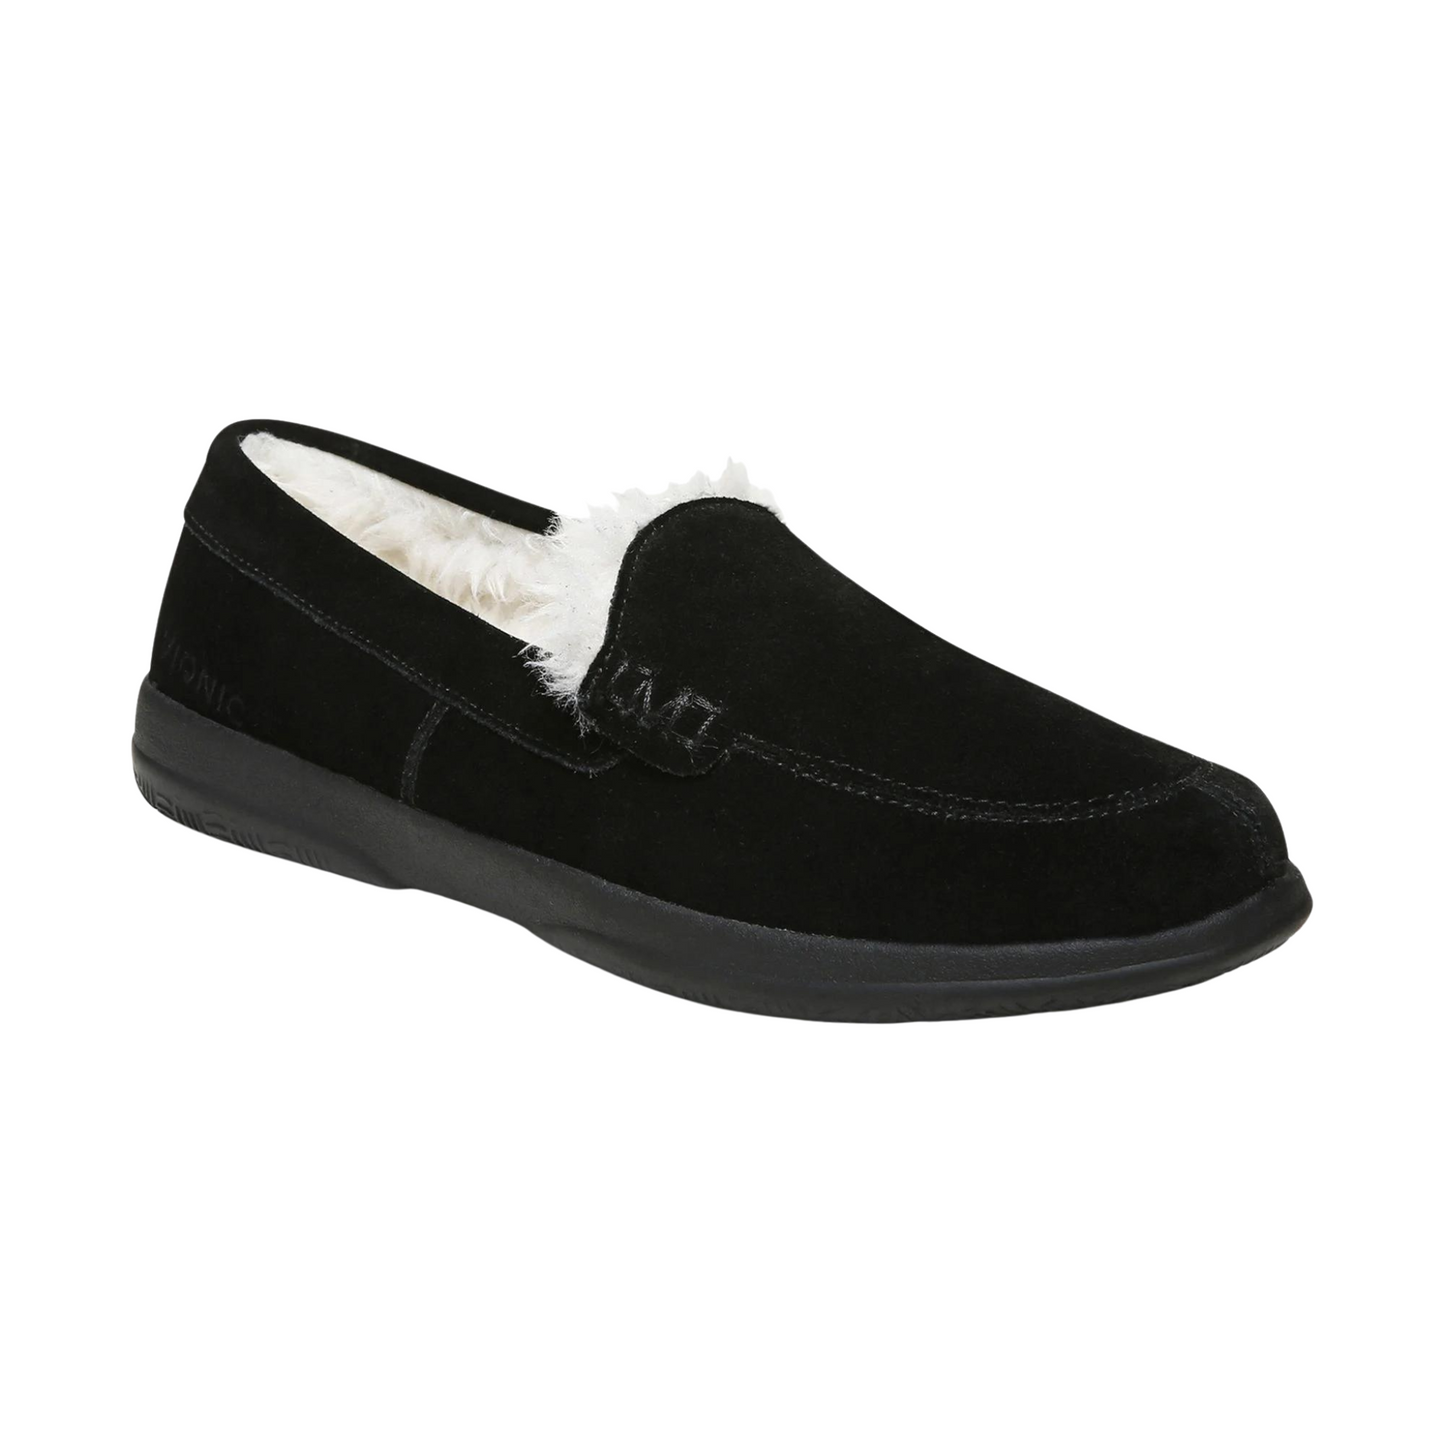 A 45 degree angle view of a black suede slipper with a plush white interior.